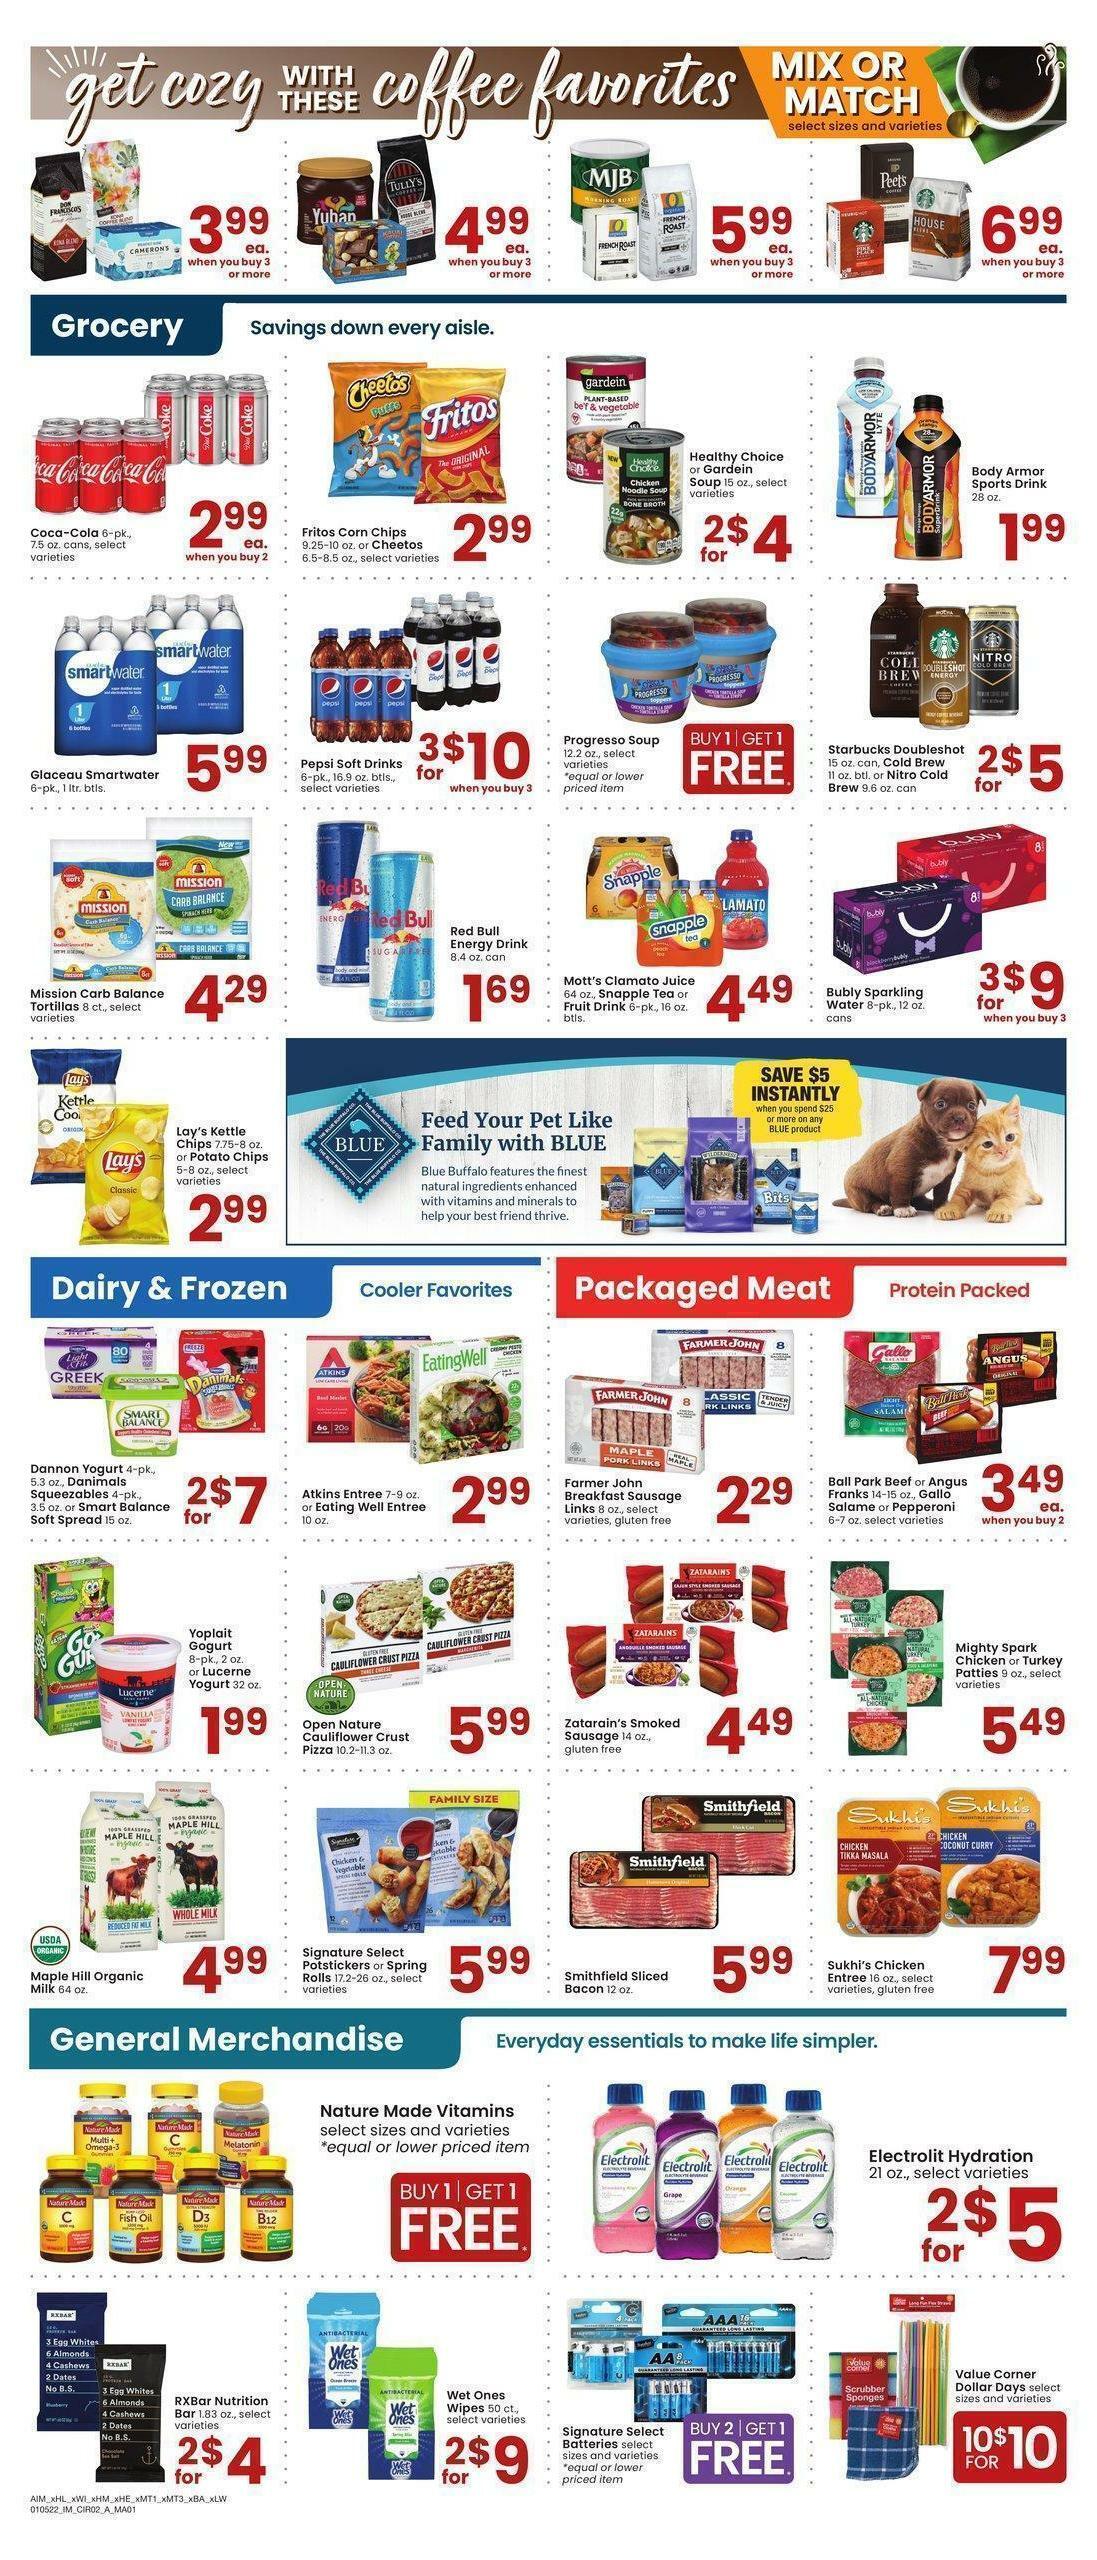 Albertsons Weekly Ad from January 5